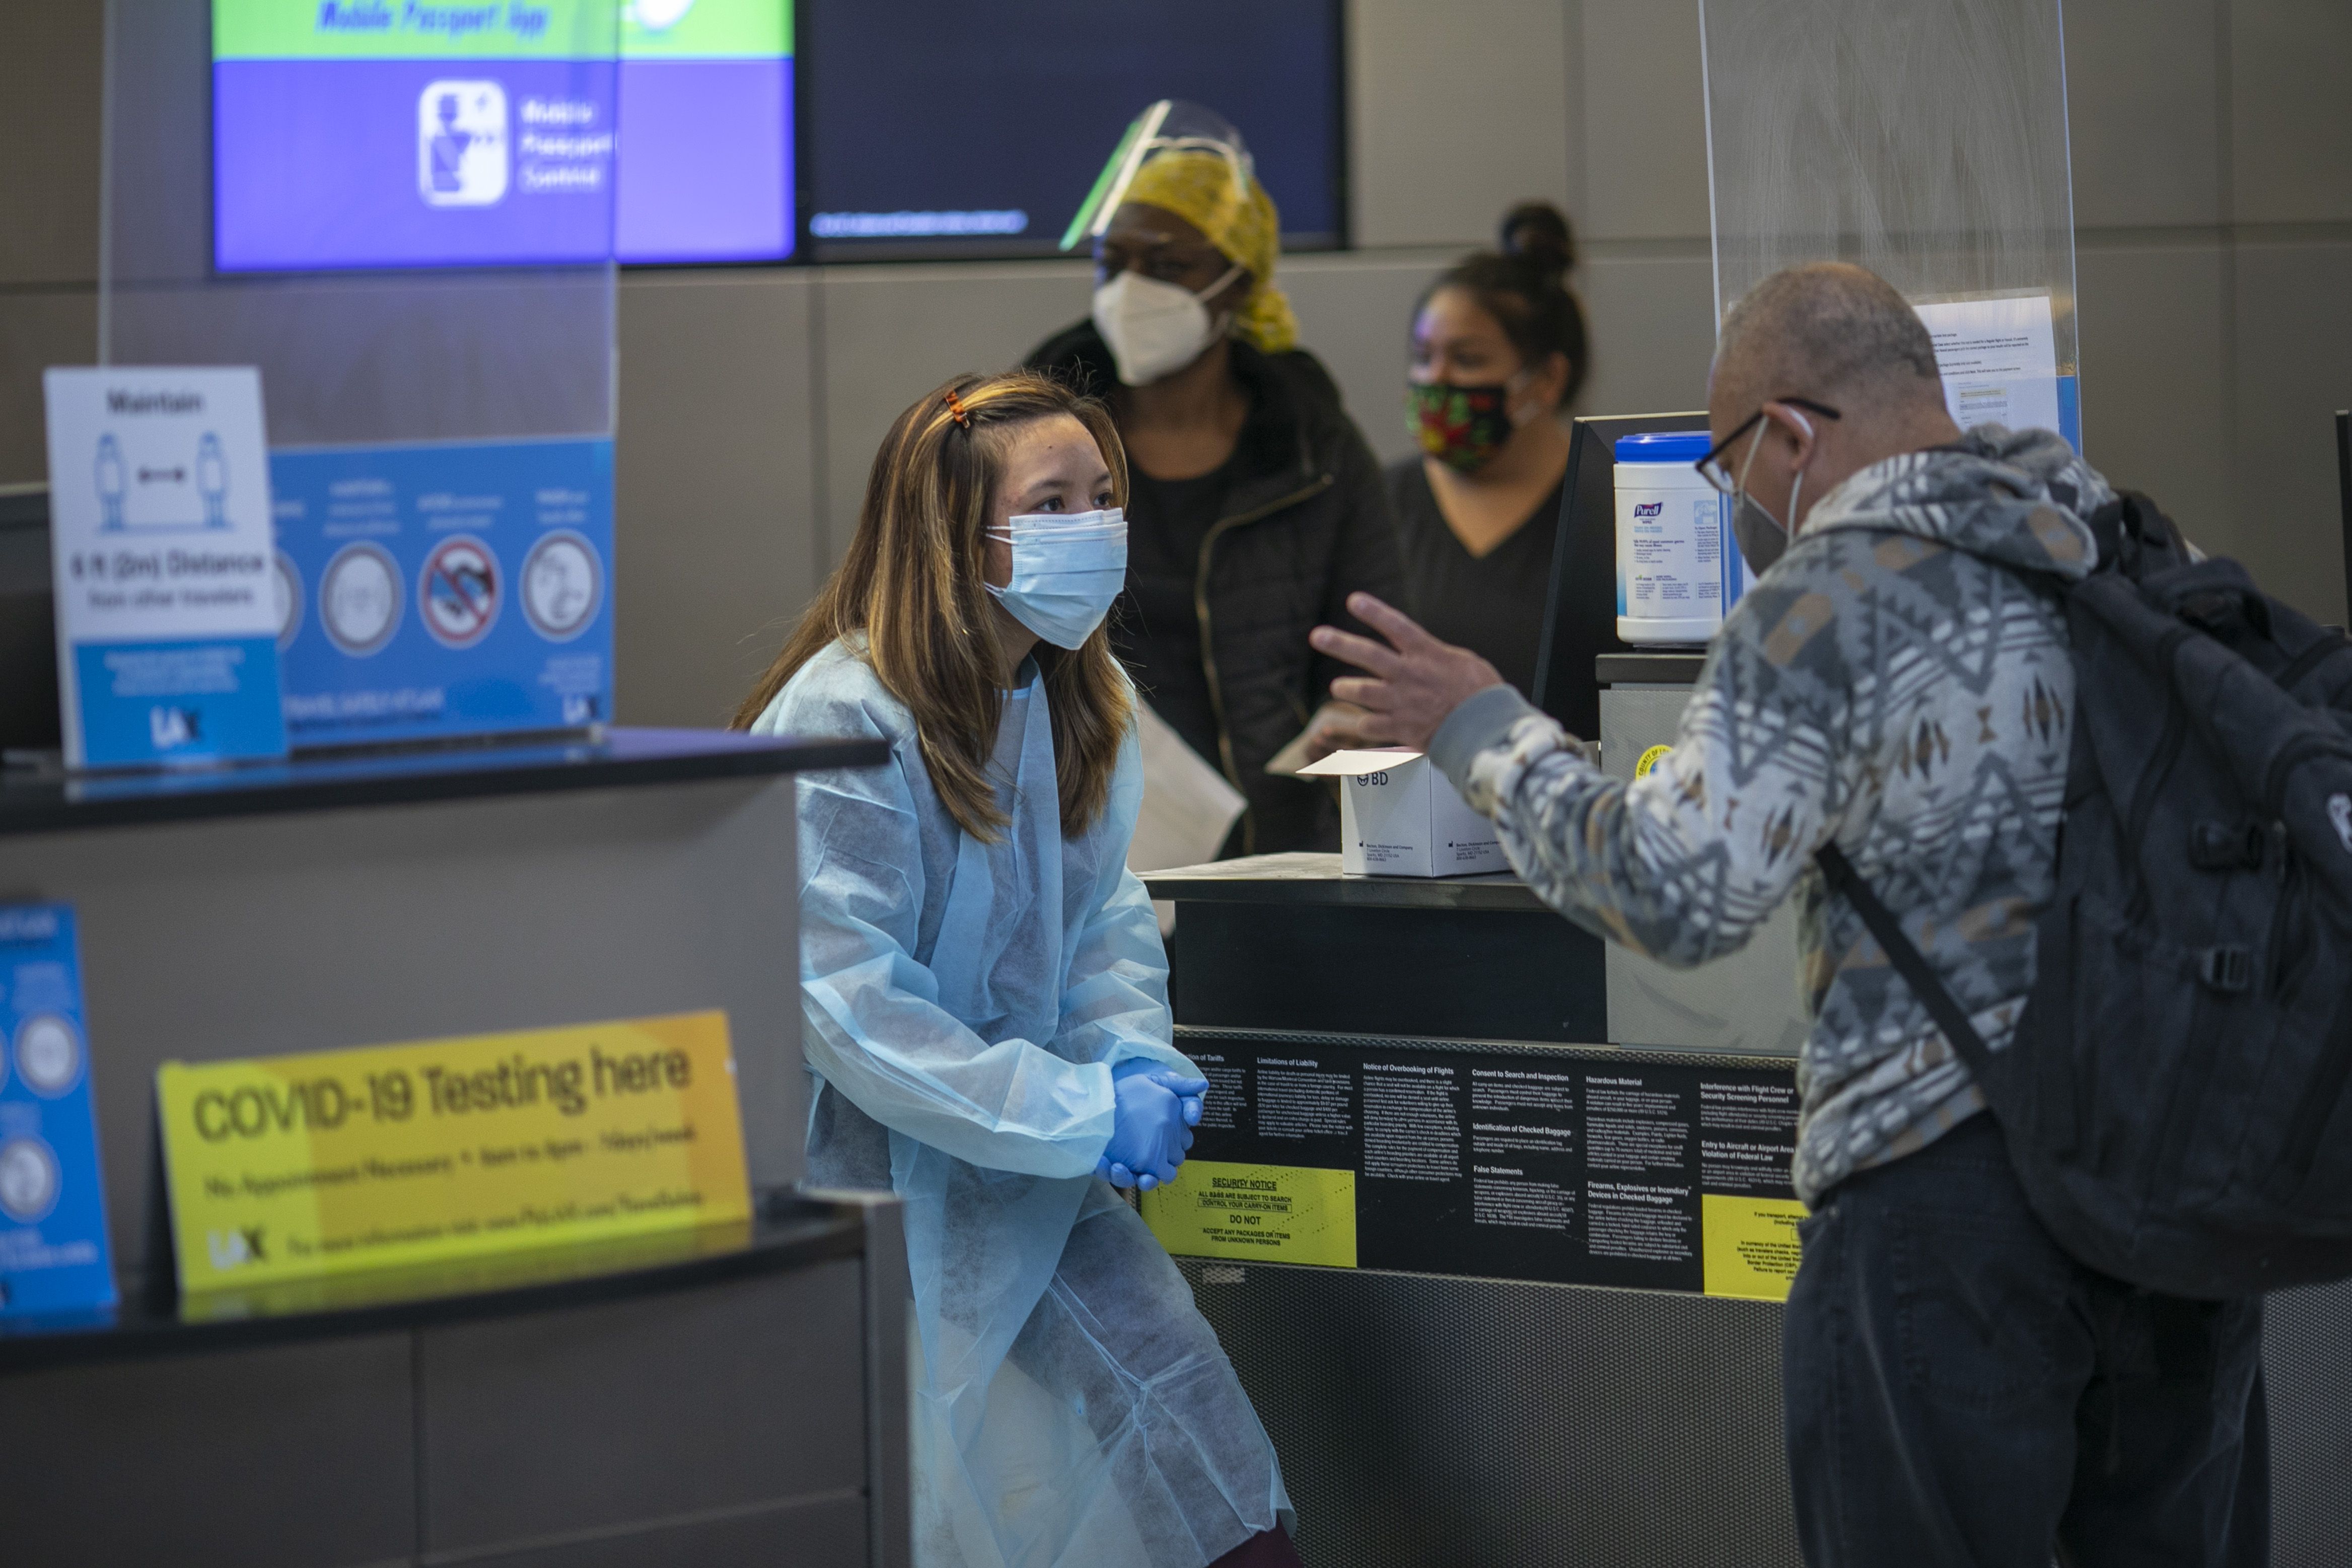 A nurse wearing a face mask and PPE stands in front of a man wearing a hoodie and backpack 